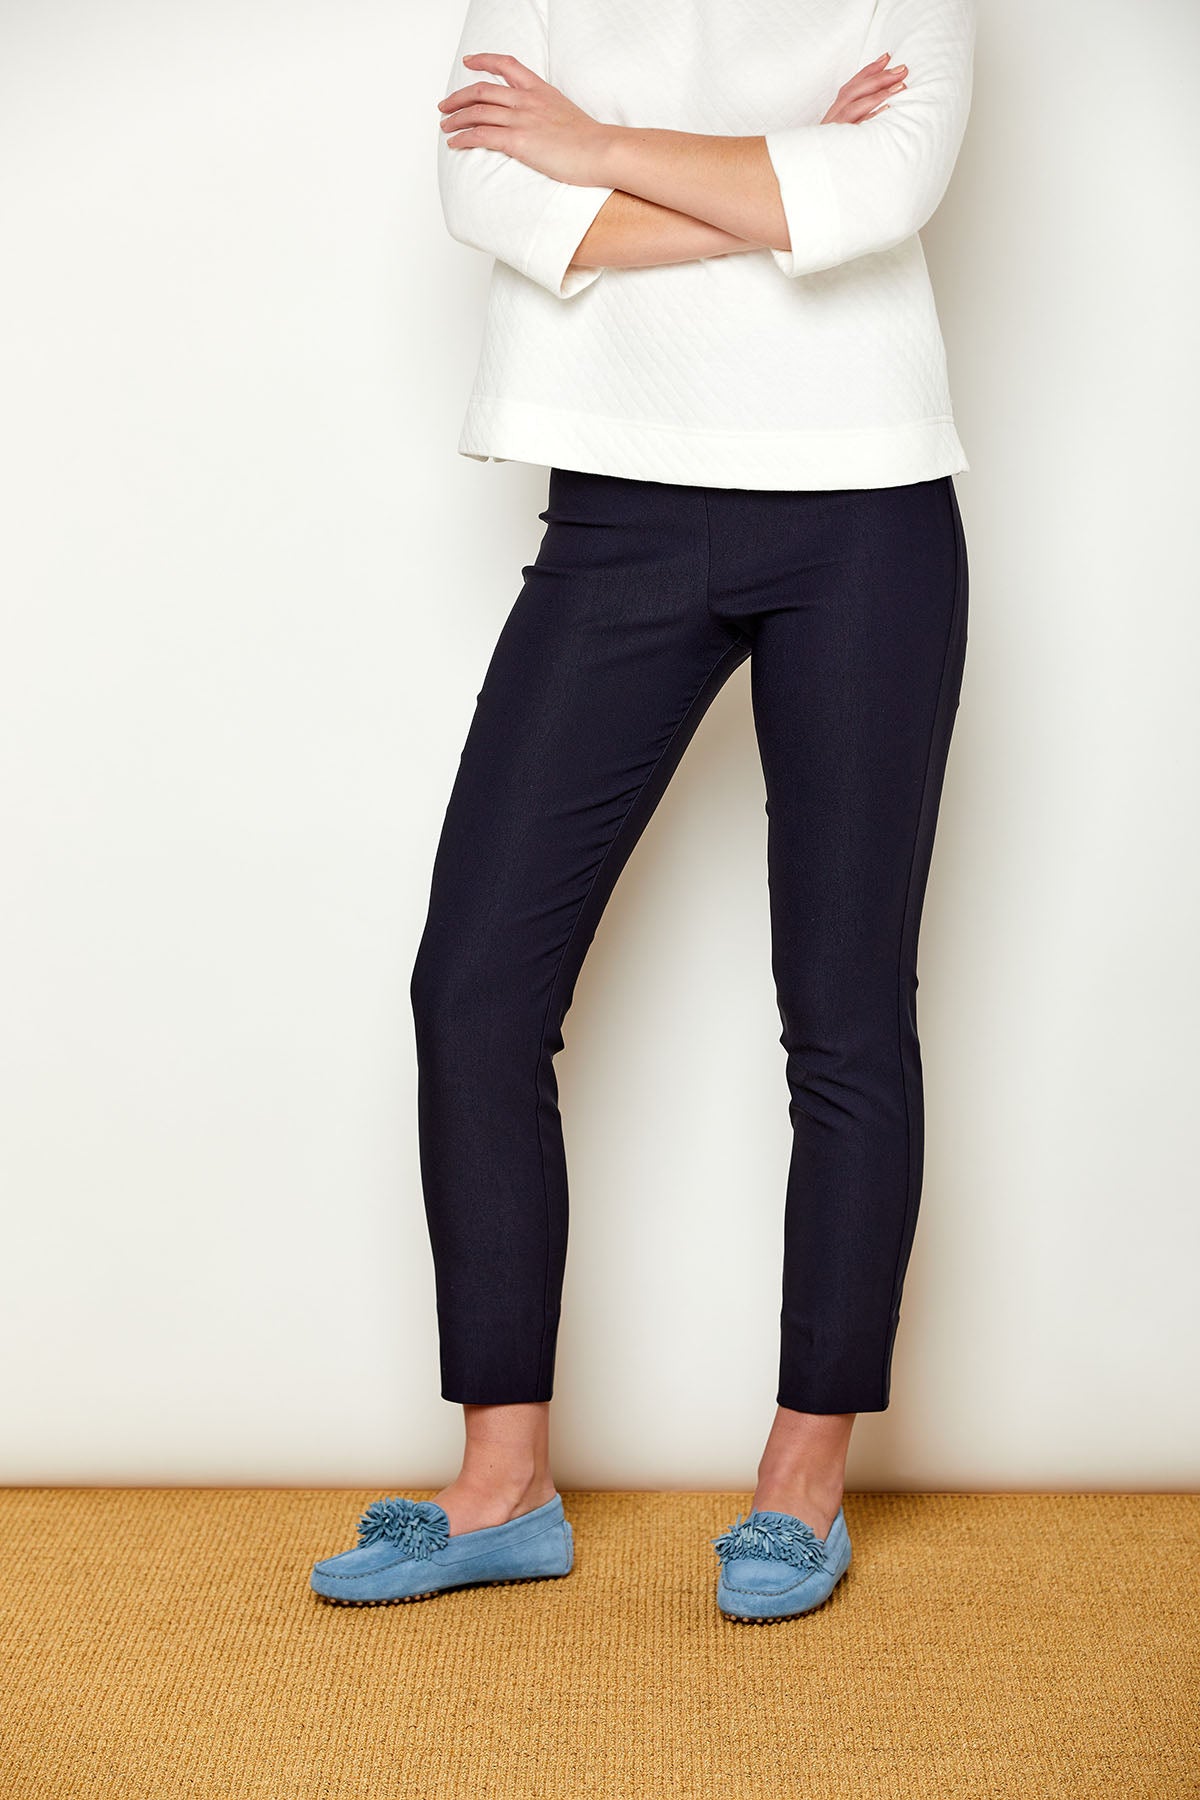 The best-selling Sara Campbell Sheri Pants in navy